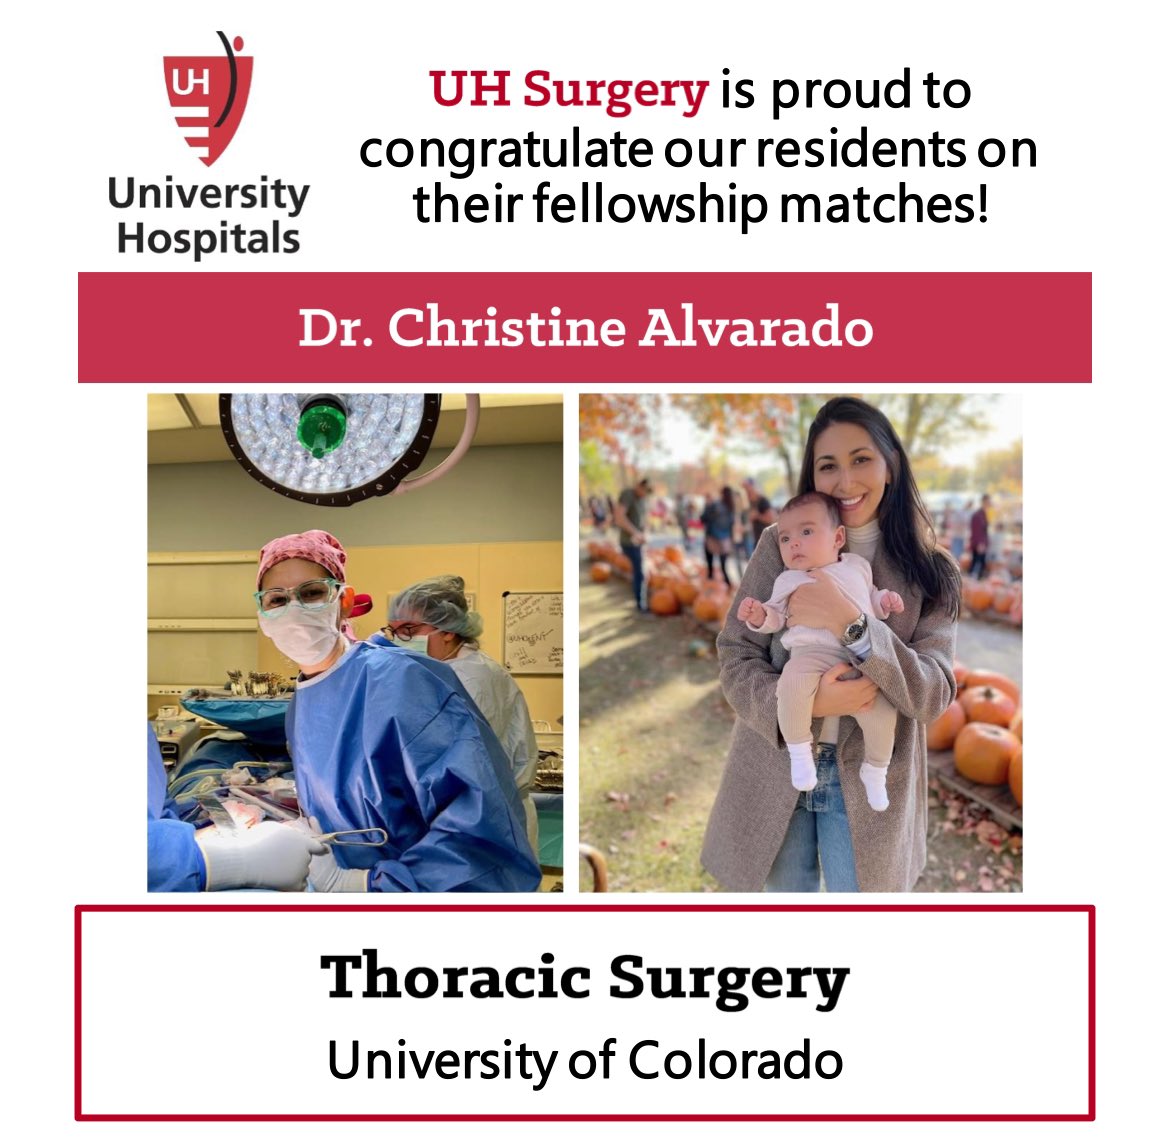 Absolutely THRILLED for our @CAlvaradoMD who will make the BEST thoracic surgeon! Congratulations! The University of Colordo is so lucky to have you! @WomenInThoracic